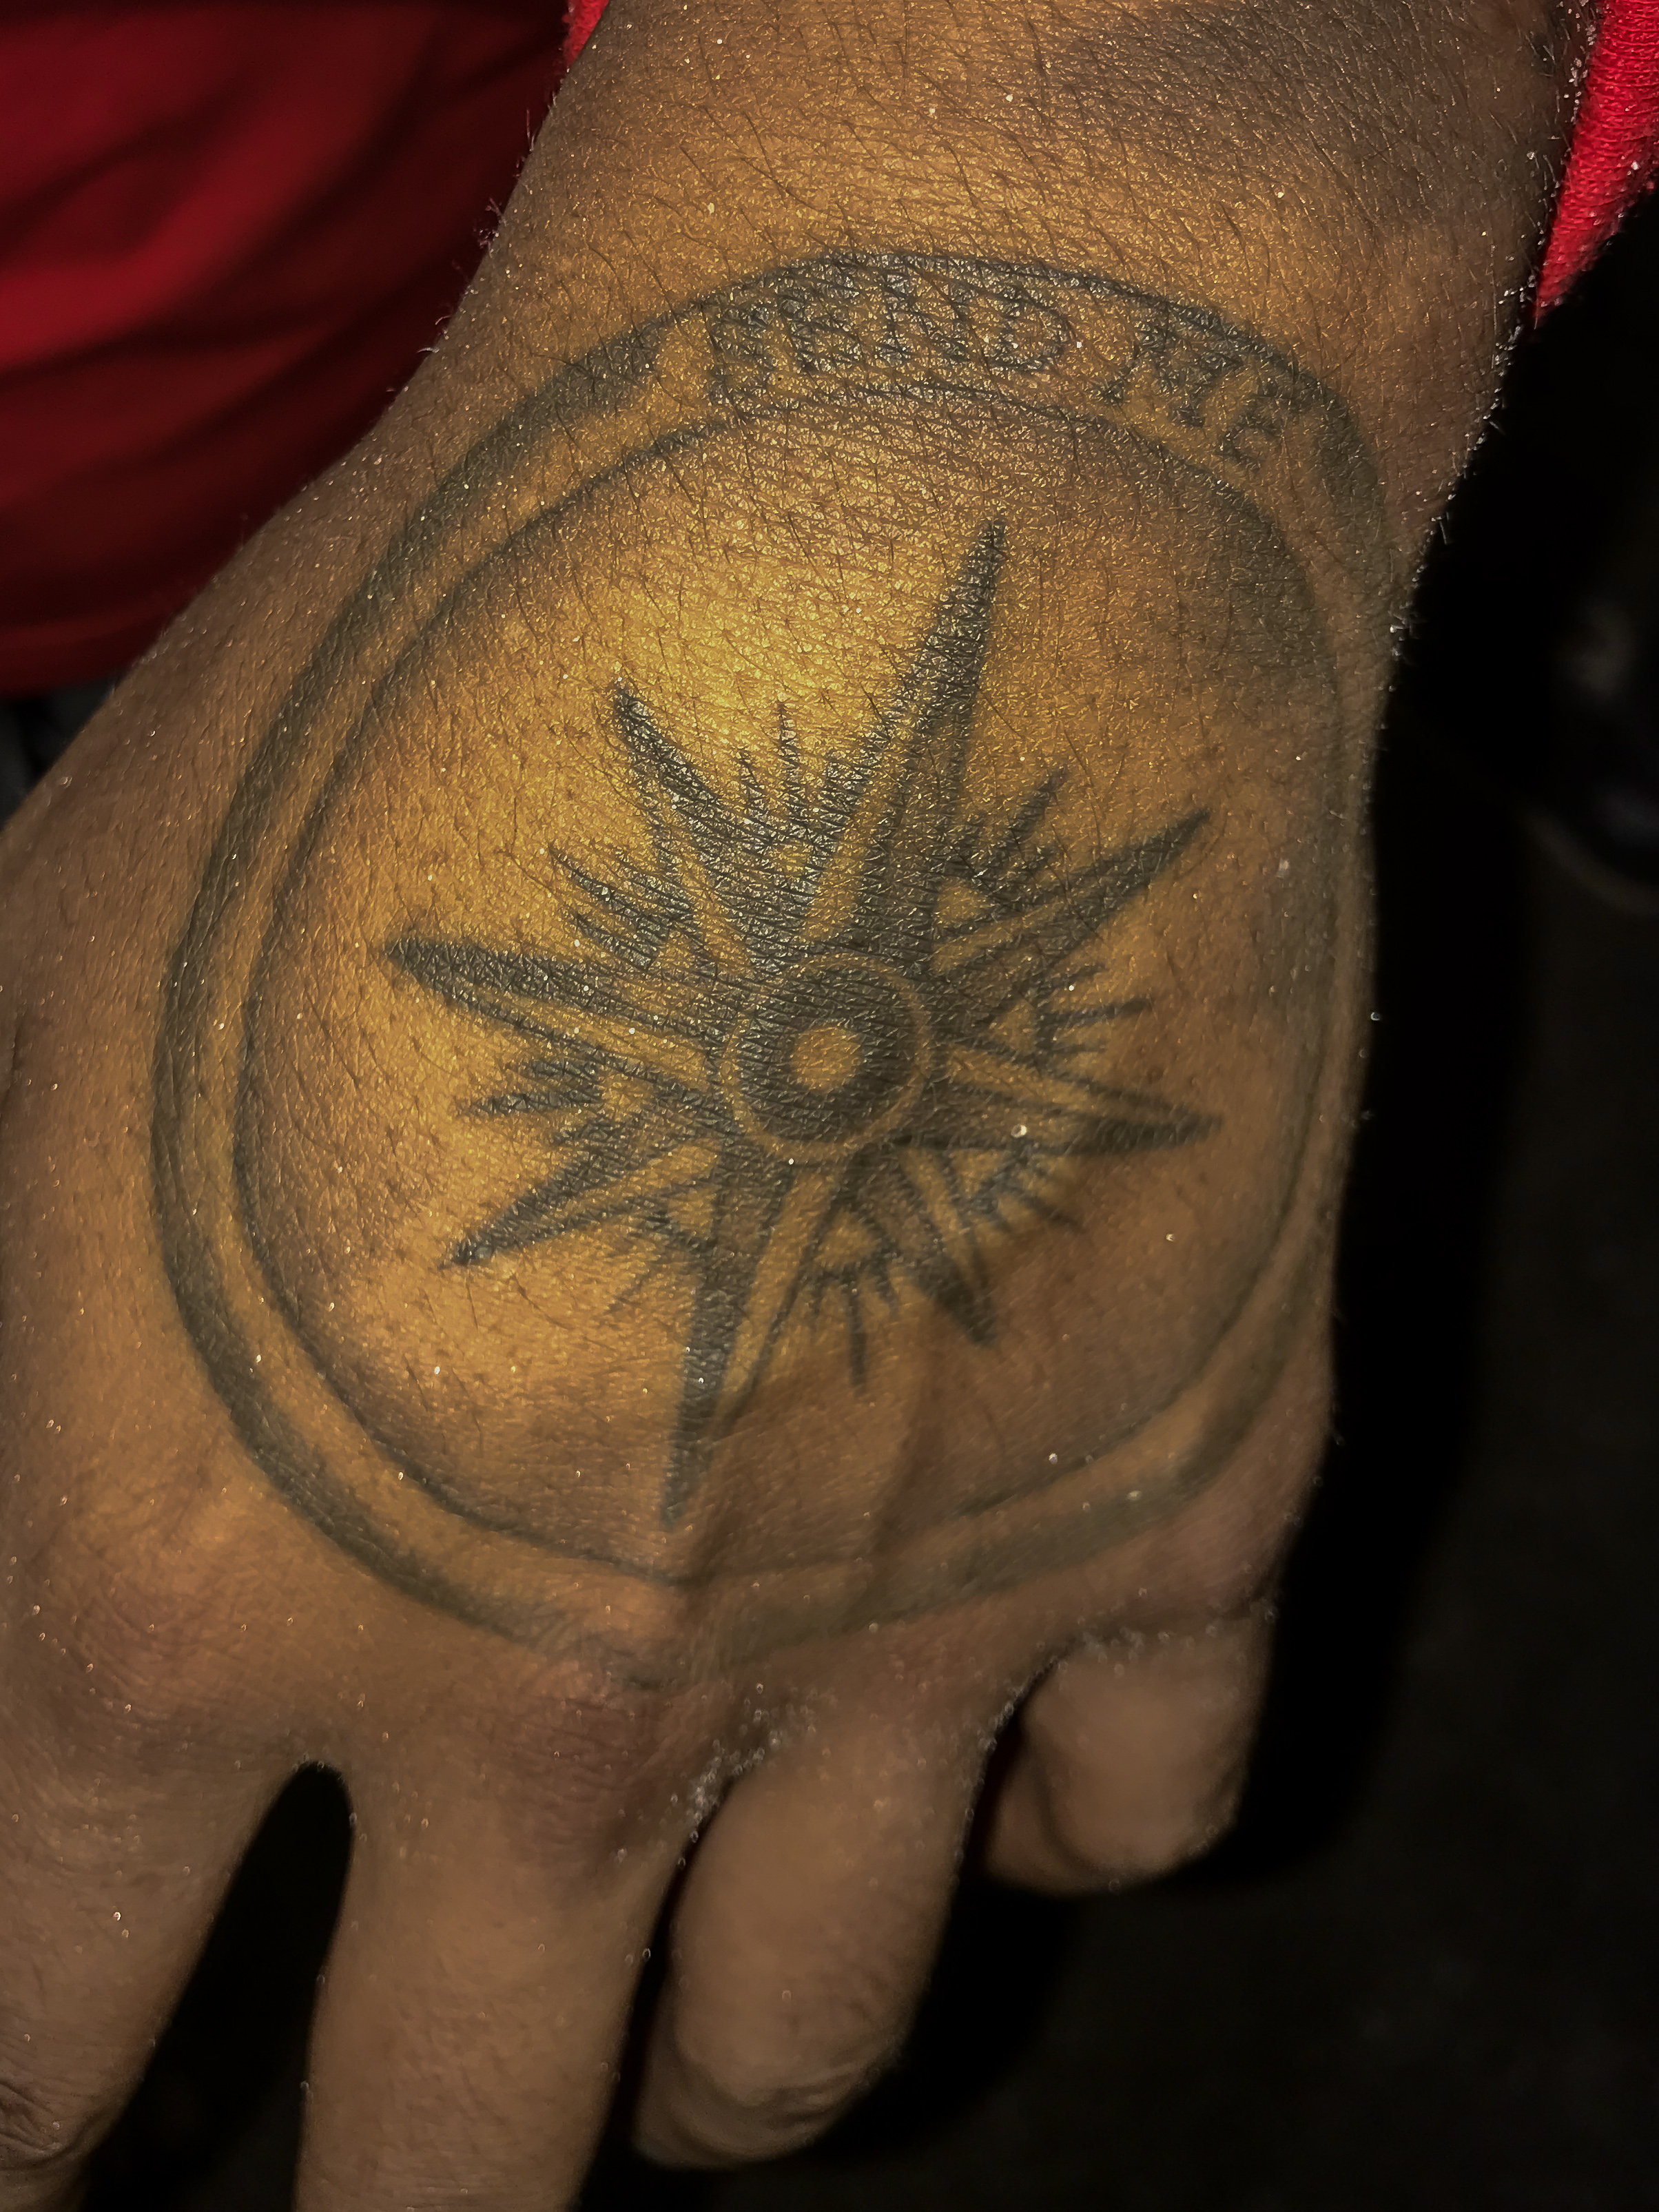 This is Lee Palacios tattoo on his left hand. This is a compass and at the top it says Send Me. Palacios got this tattoo during his second mission trip to Cuba.